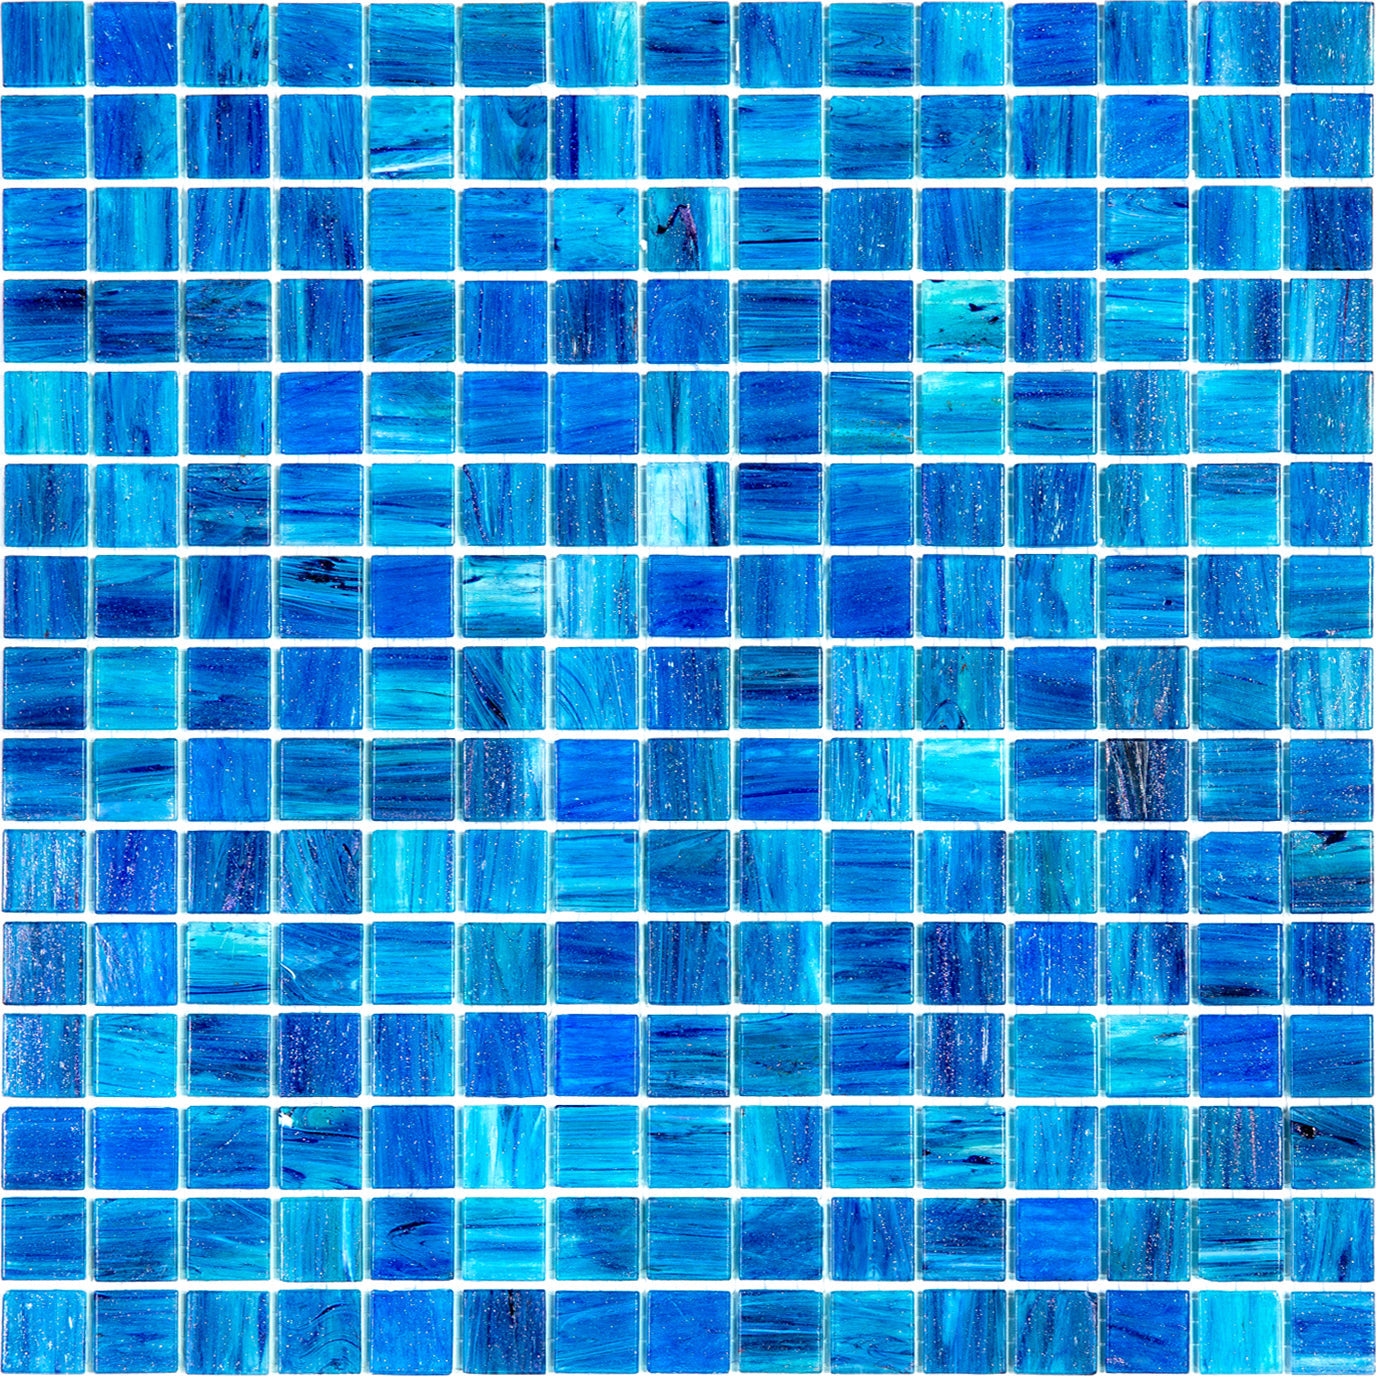 mir alma solid colors 0_8 inch stella stn57 wall and floor mosaic distributed by surface group natural materials